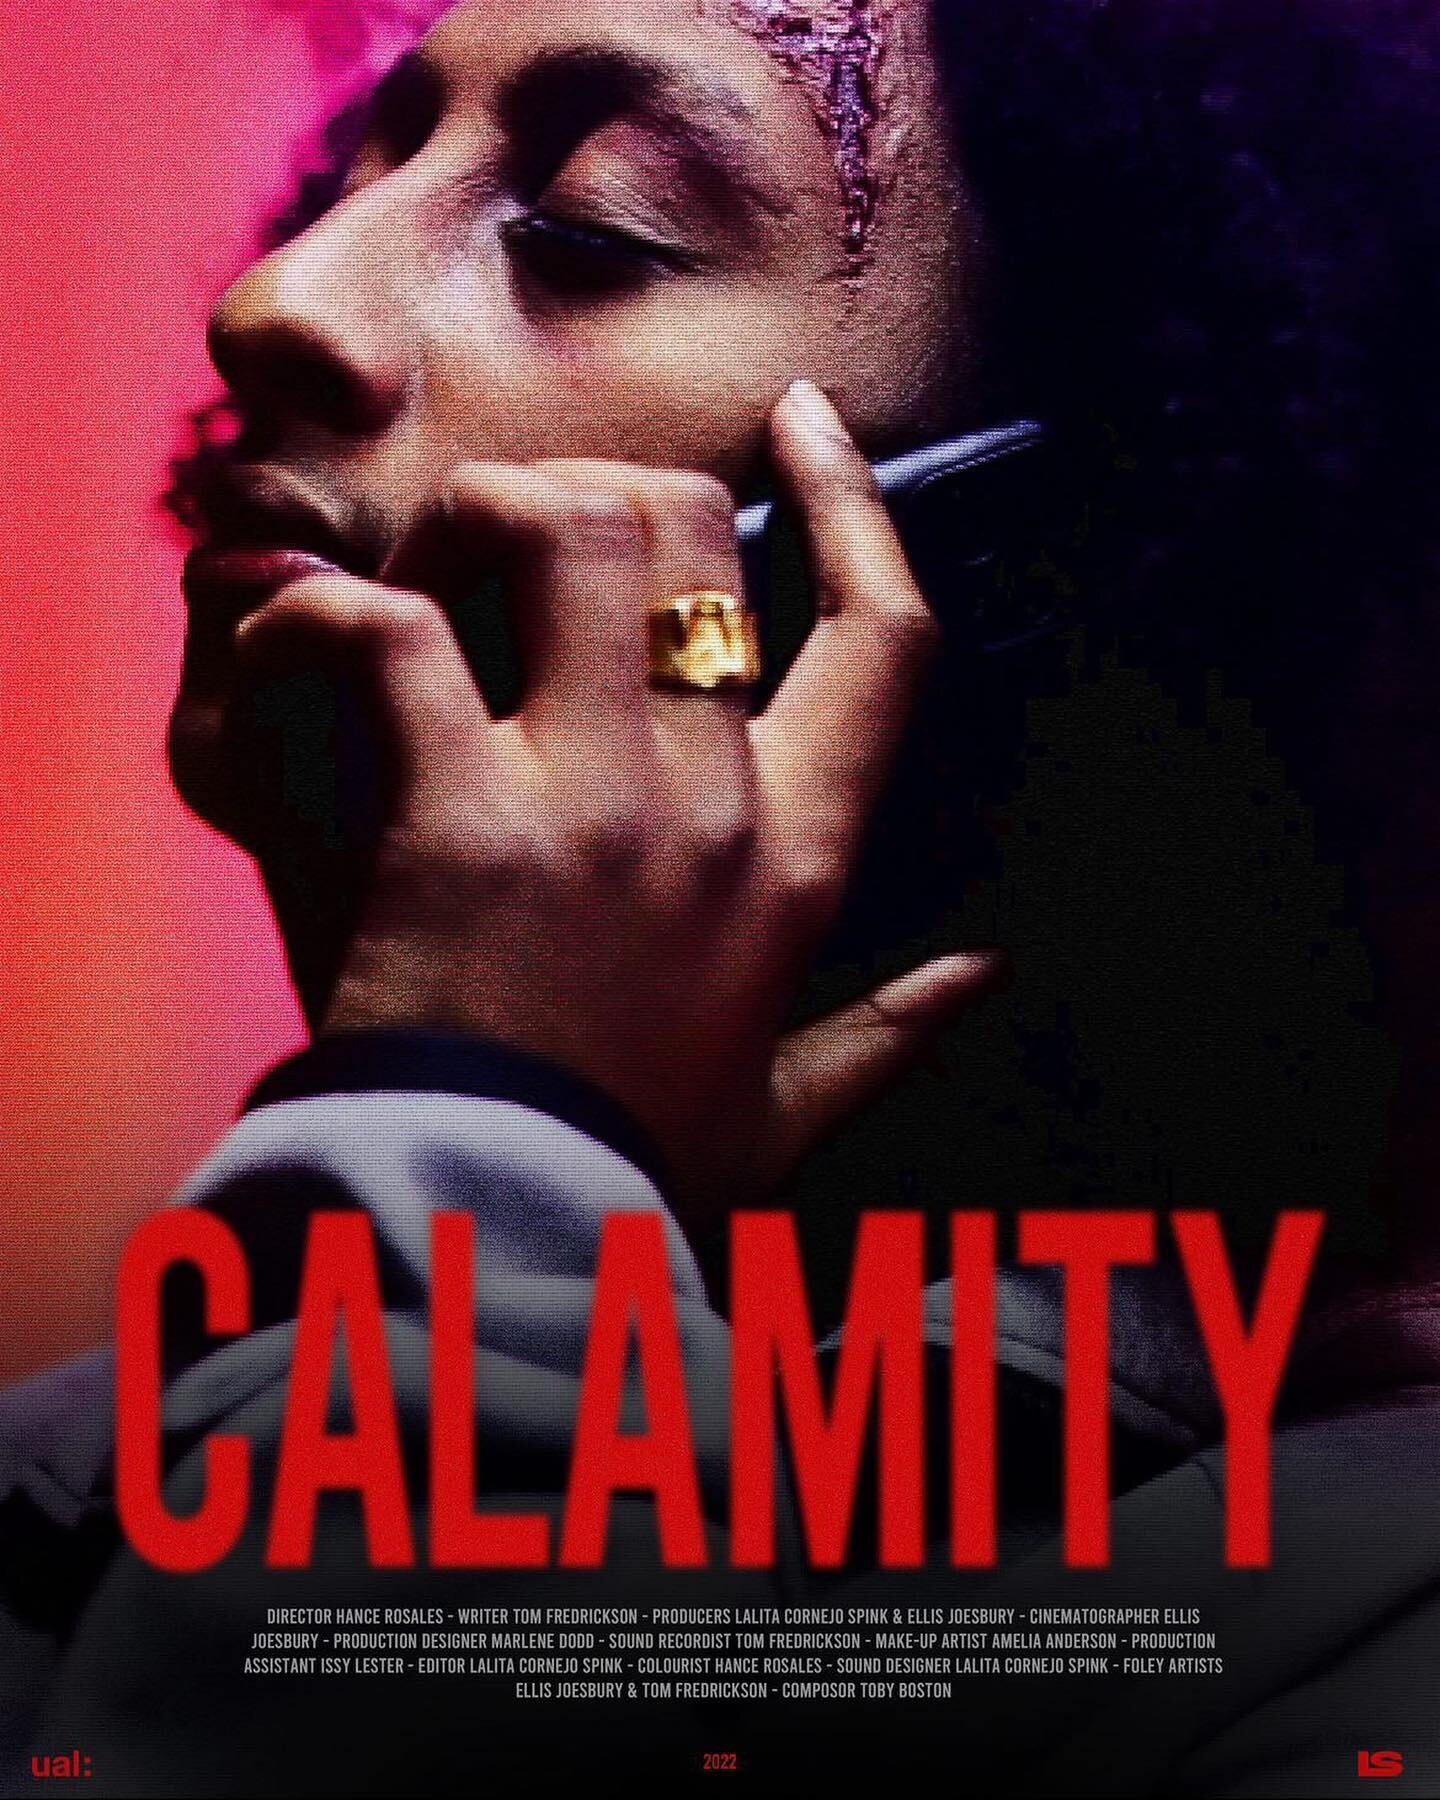 CALAMITY &mdash; OUT NOW

Composed the musical score for this short film and release trailer. Watch the full film and hear my score on @ukfullyfocused at the link in my bio 🔗